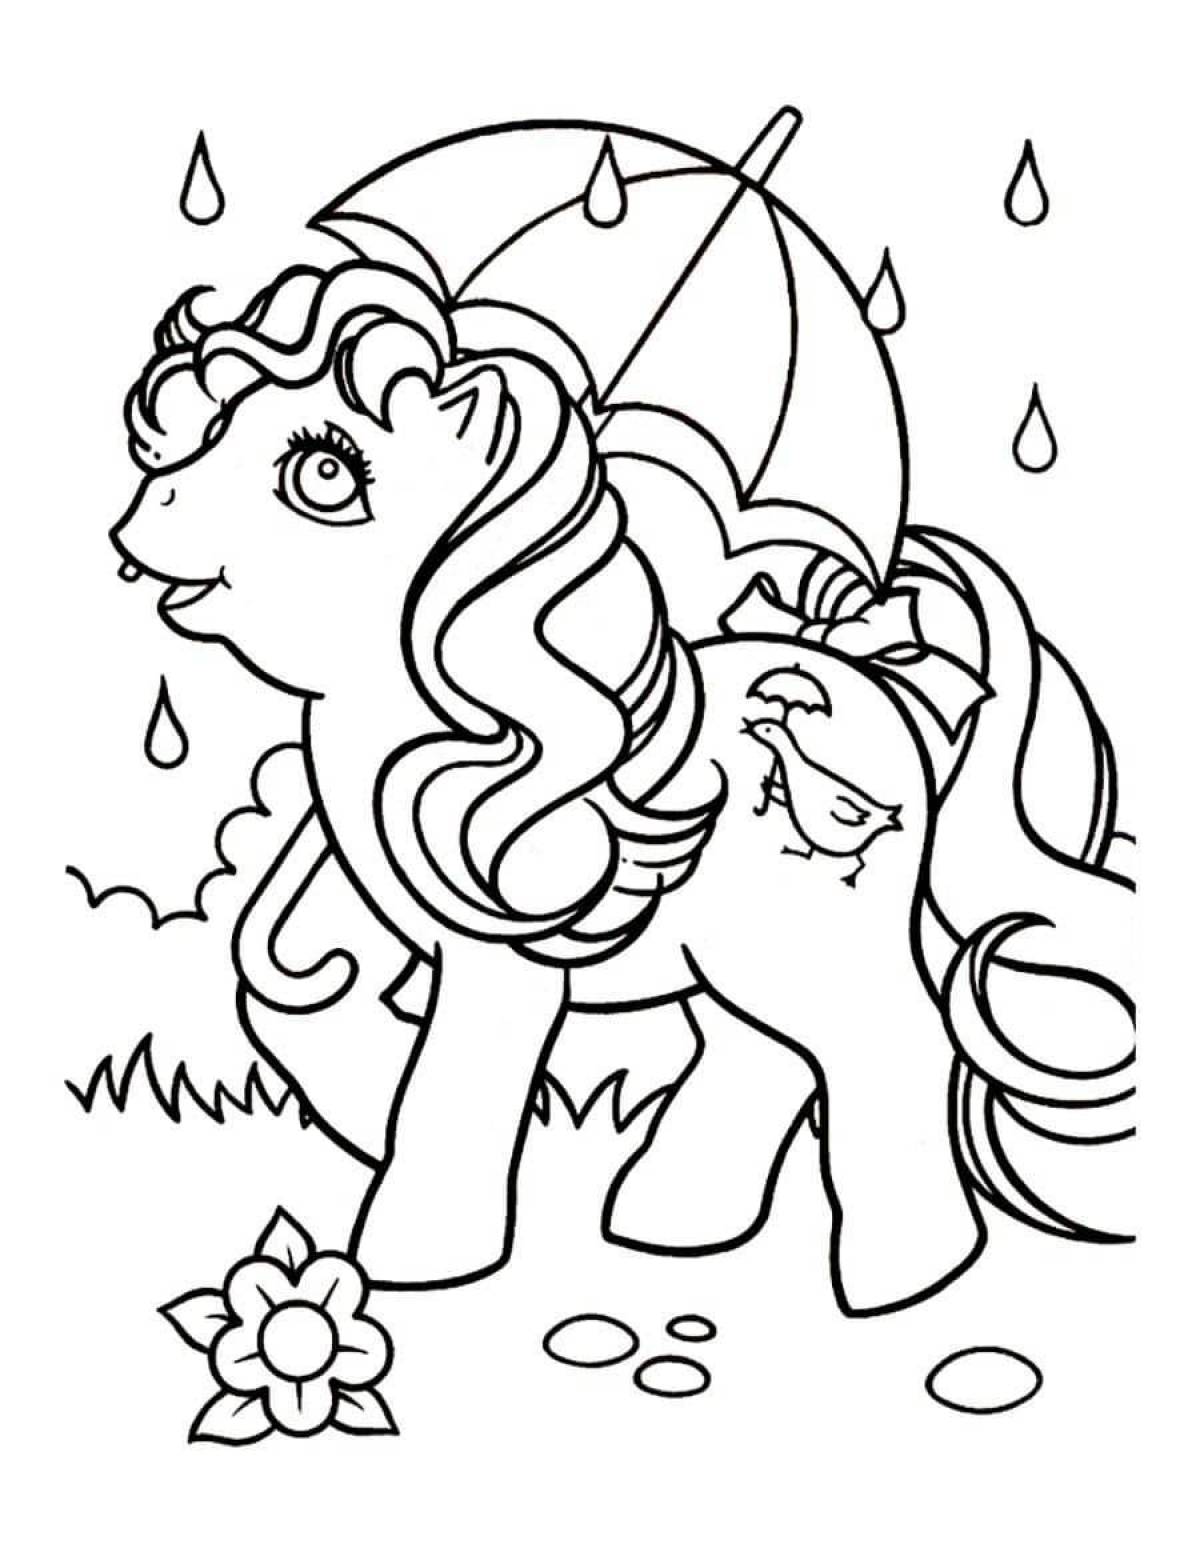 Colorful wonderland coloring page 6 years old